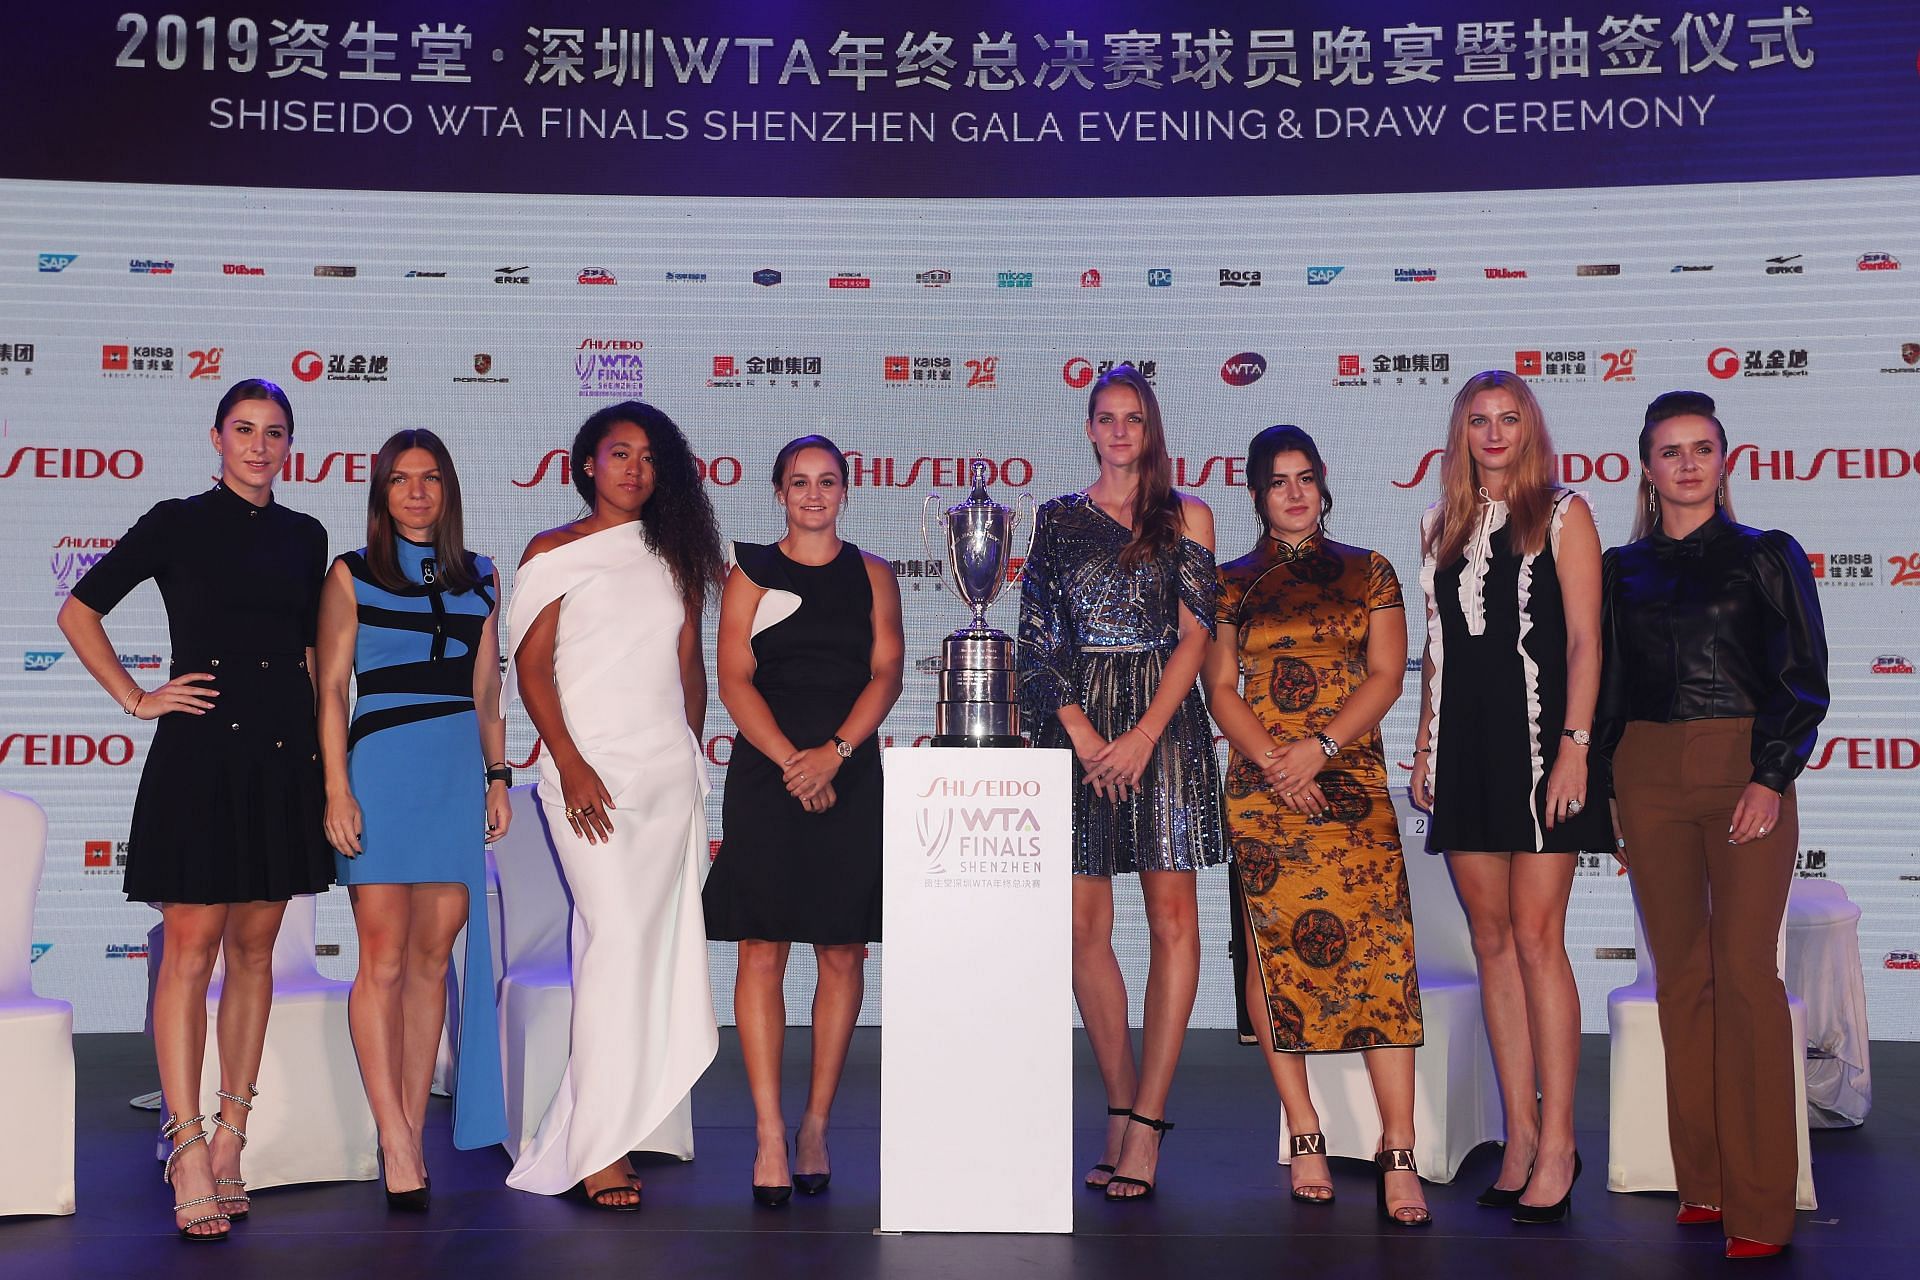 Top players at the 2019 WTA Finals